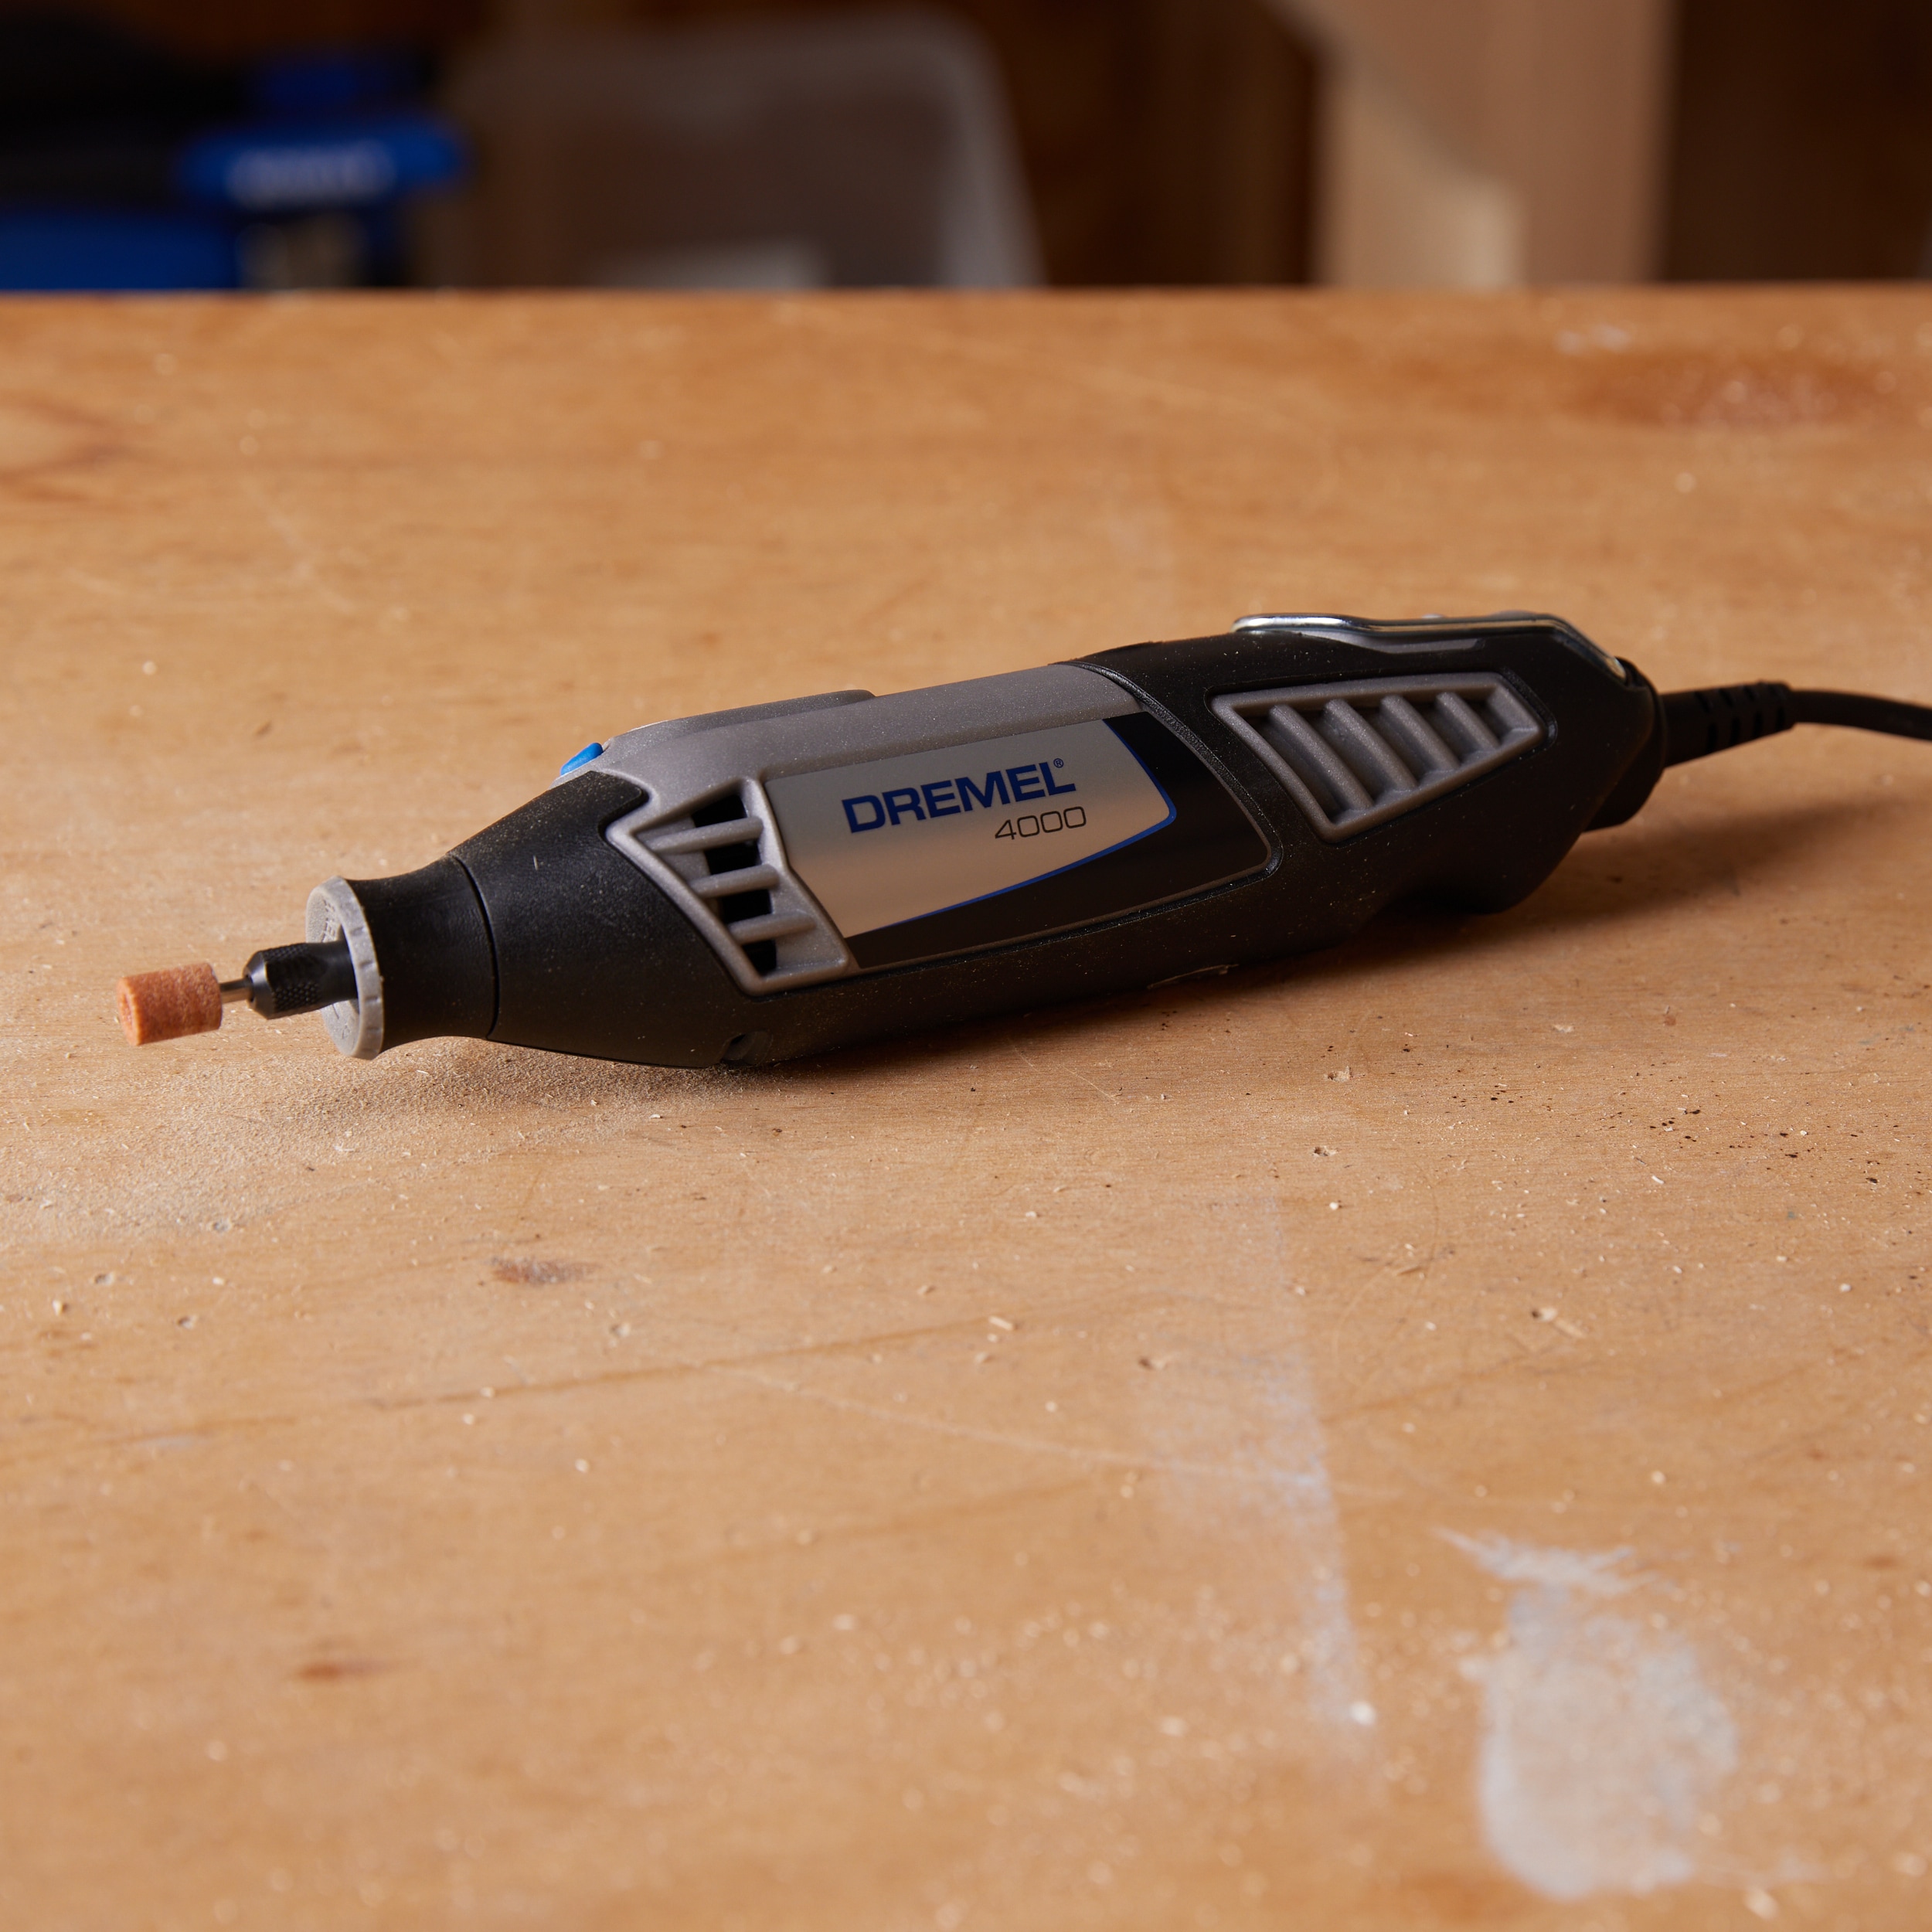 Dremel 4000 Series Rotary Tool Variable 35,000rpm with 30